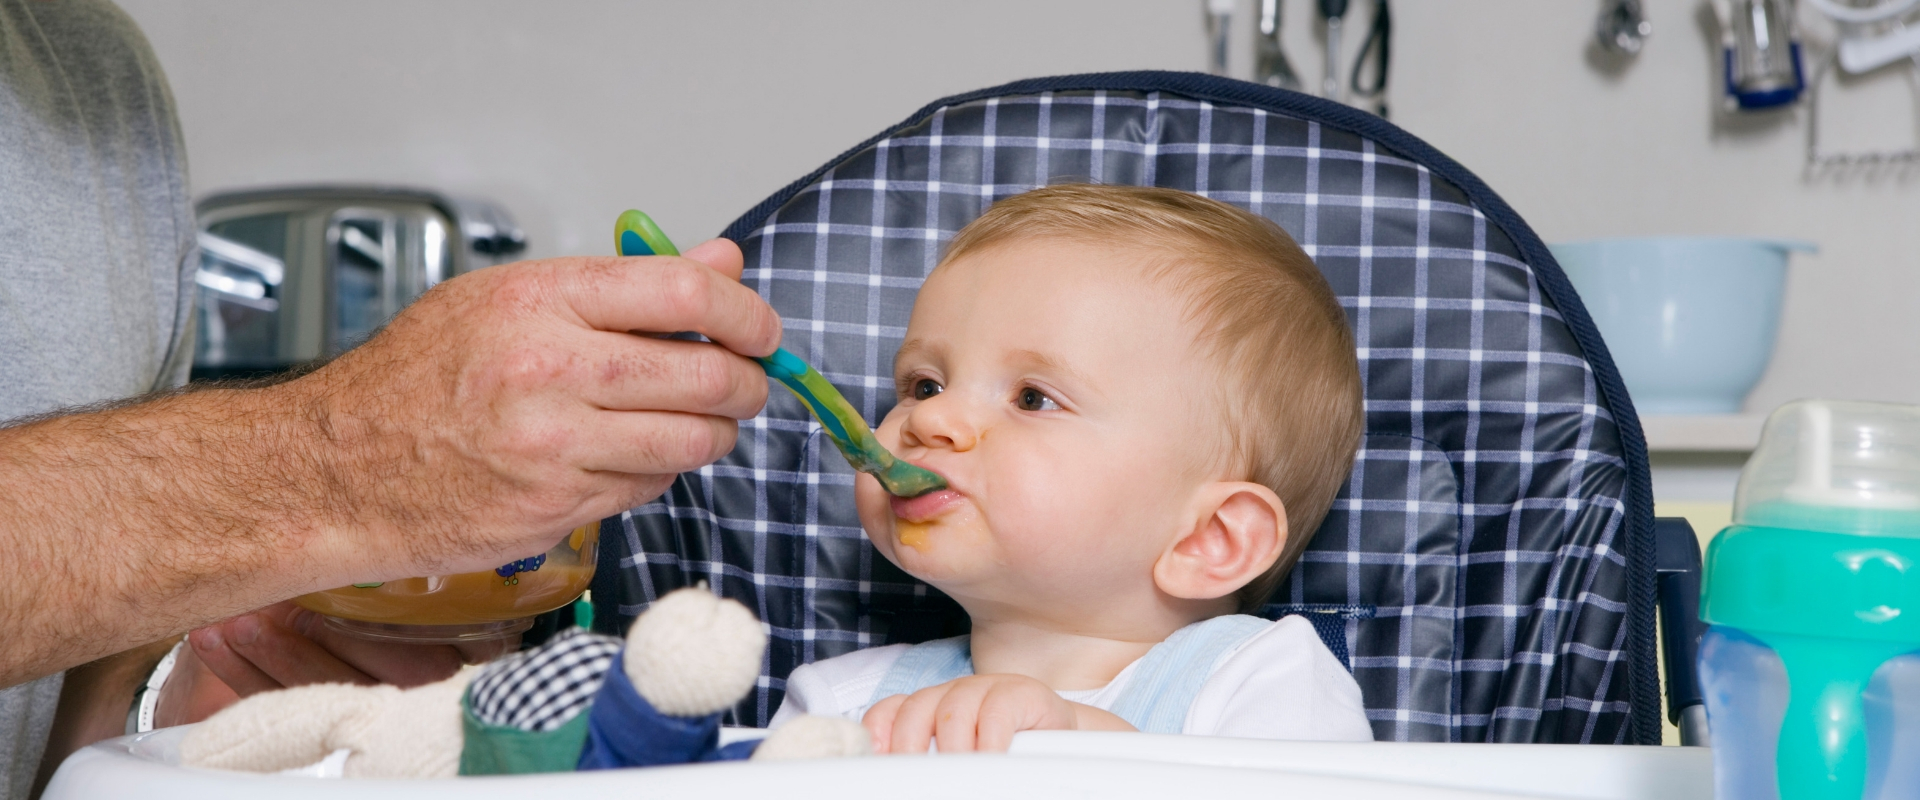 Baby Nutrition MileStones: From New Born To 4 Yrs Old